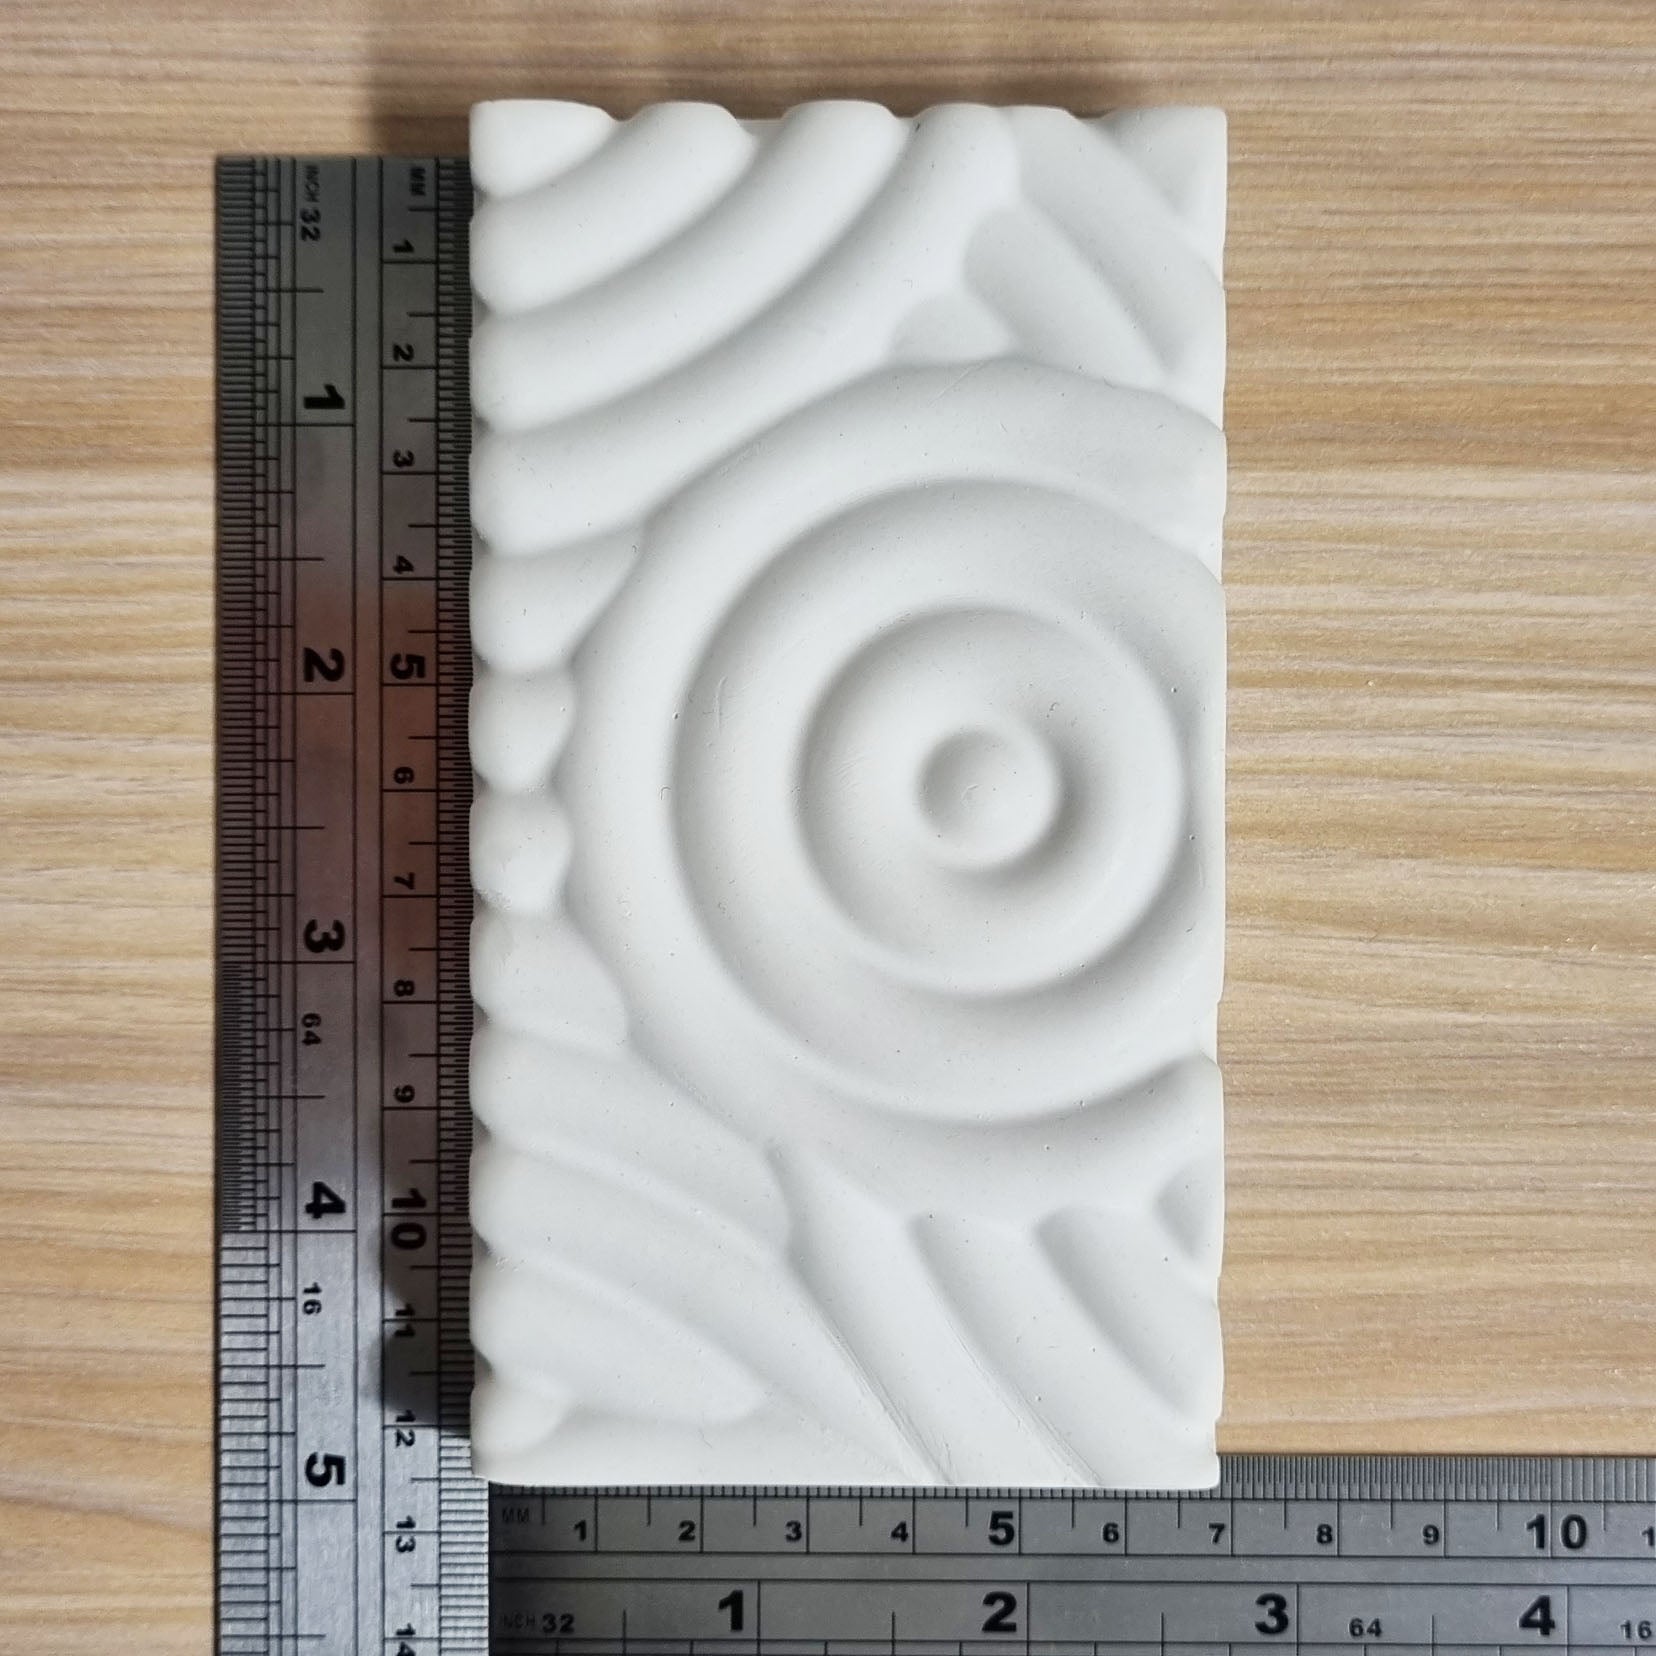 Spiral Bar Mould | Truly Personal | Bath Bomb, Soap, Resin, Chocolate, Jelly, Wax Melts Mold